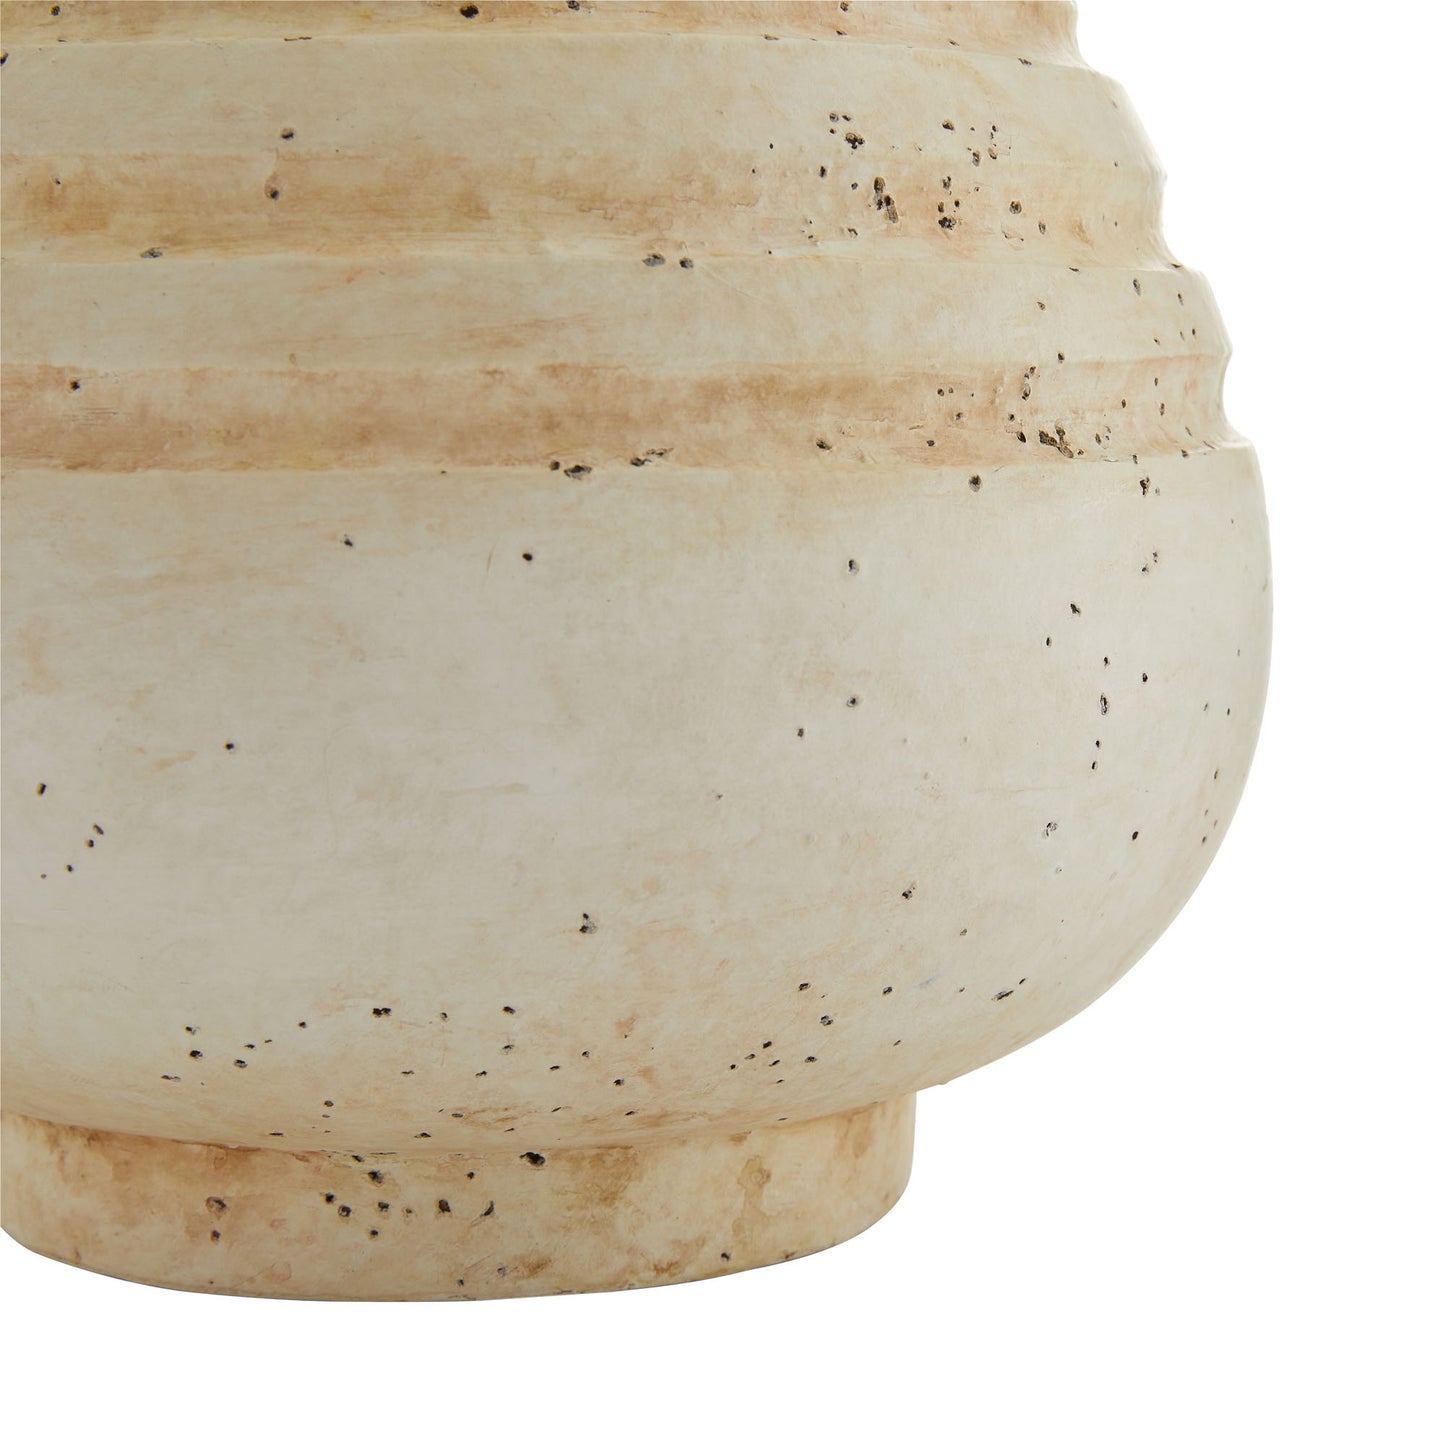 Marisol Vase - Toasted Ivory Terracotta Pot - Rustic Desert Décor - Home or Office Plant Planter